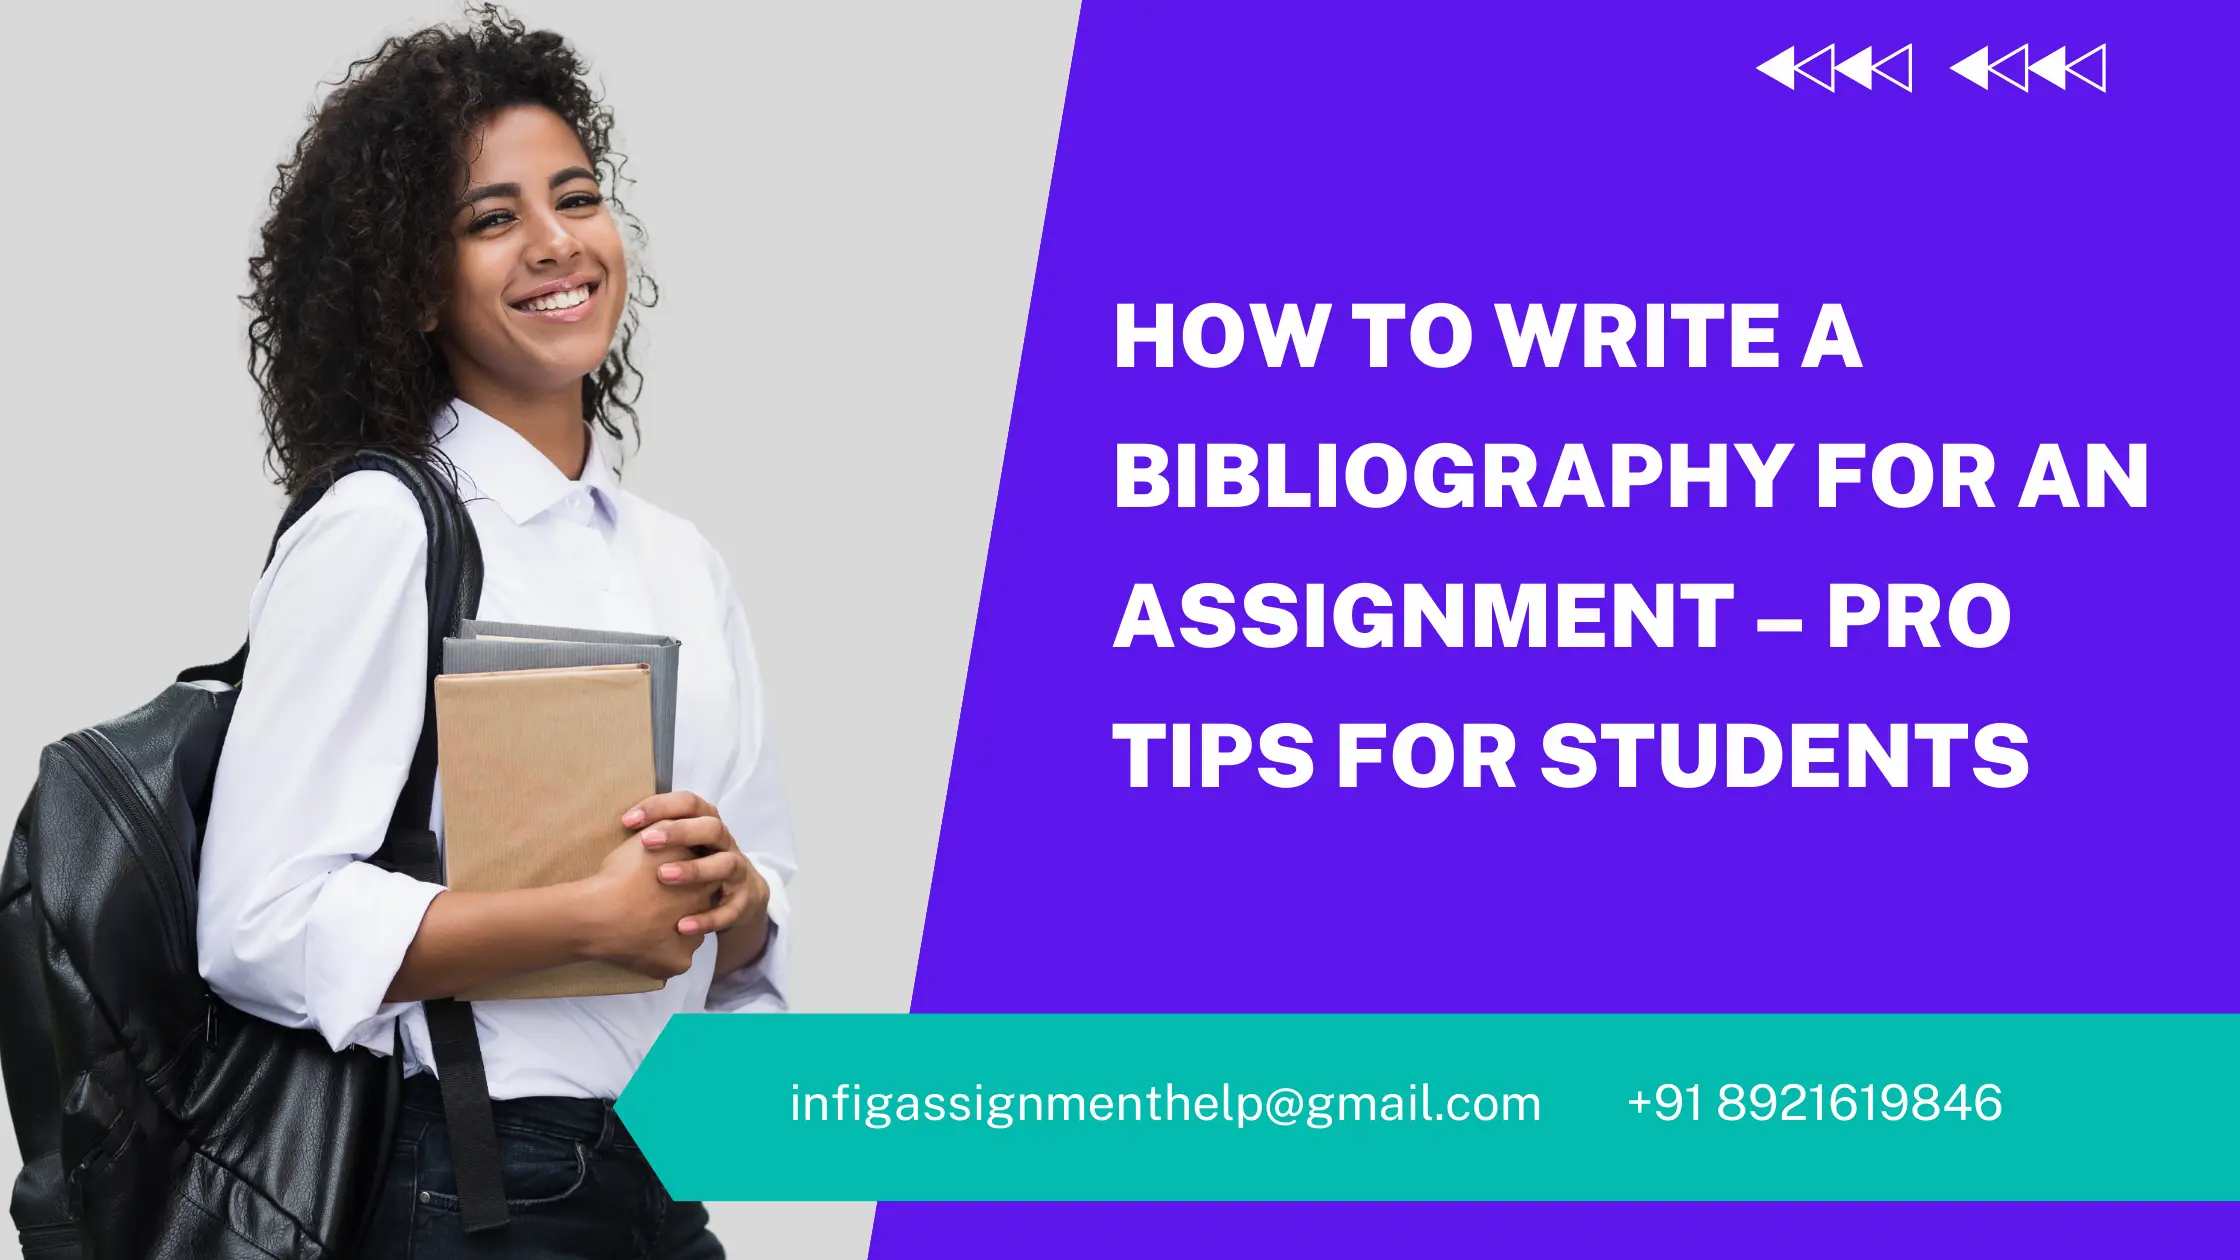 How To Write a Bibliography for An Assignment – Pro Tips for Students